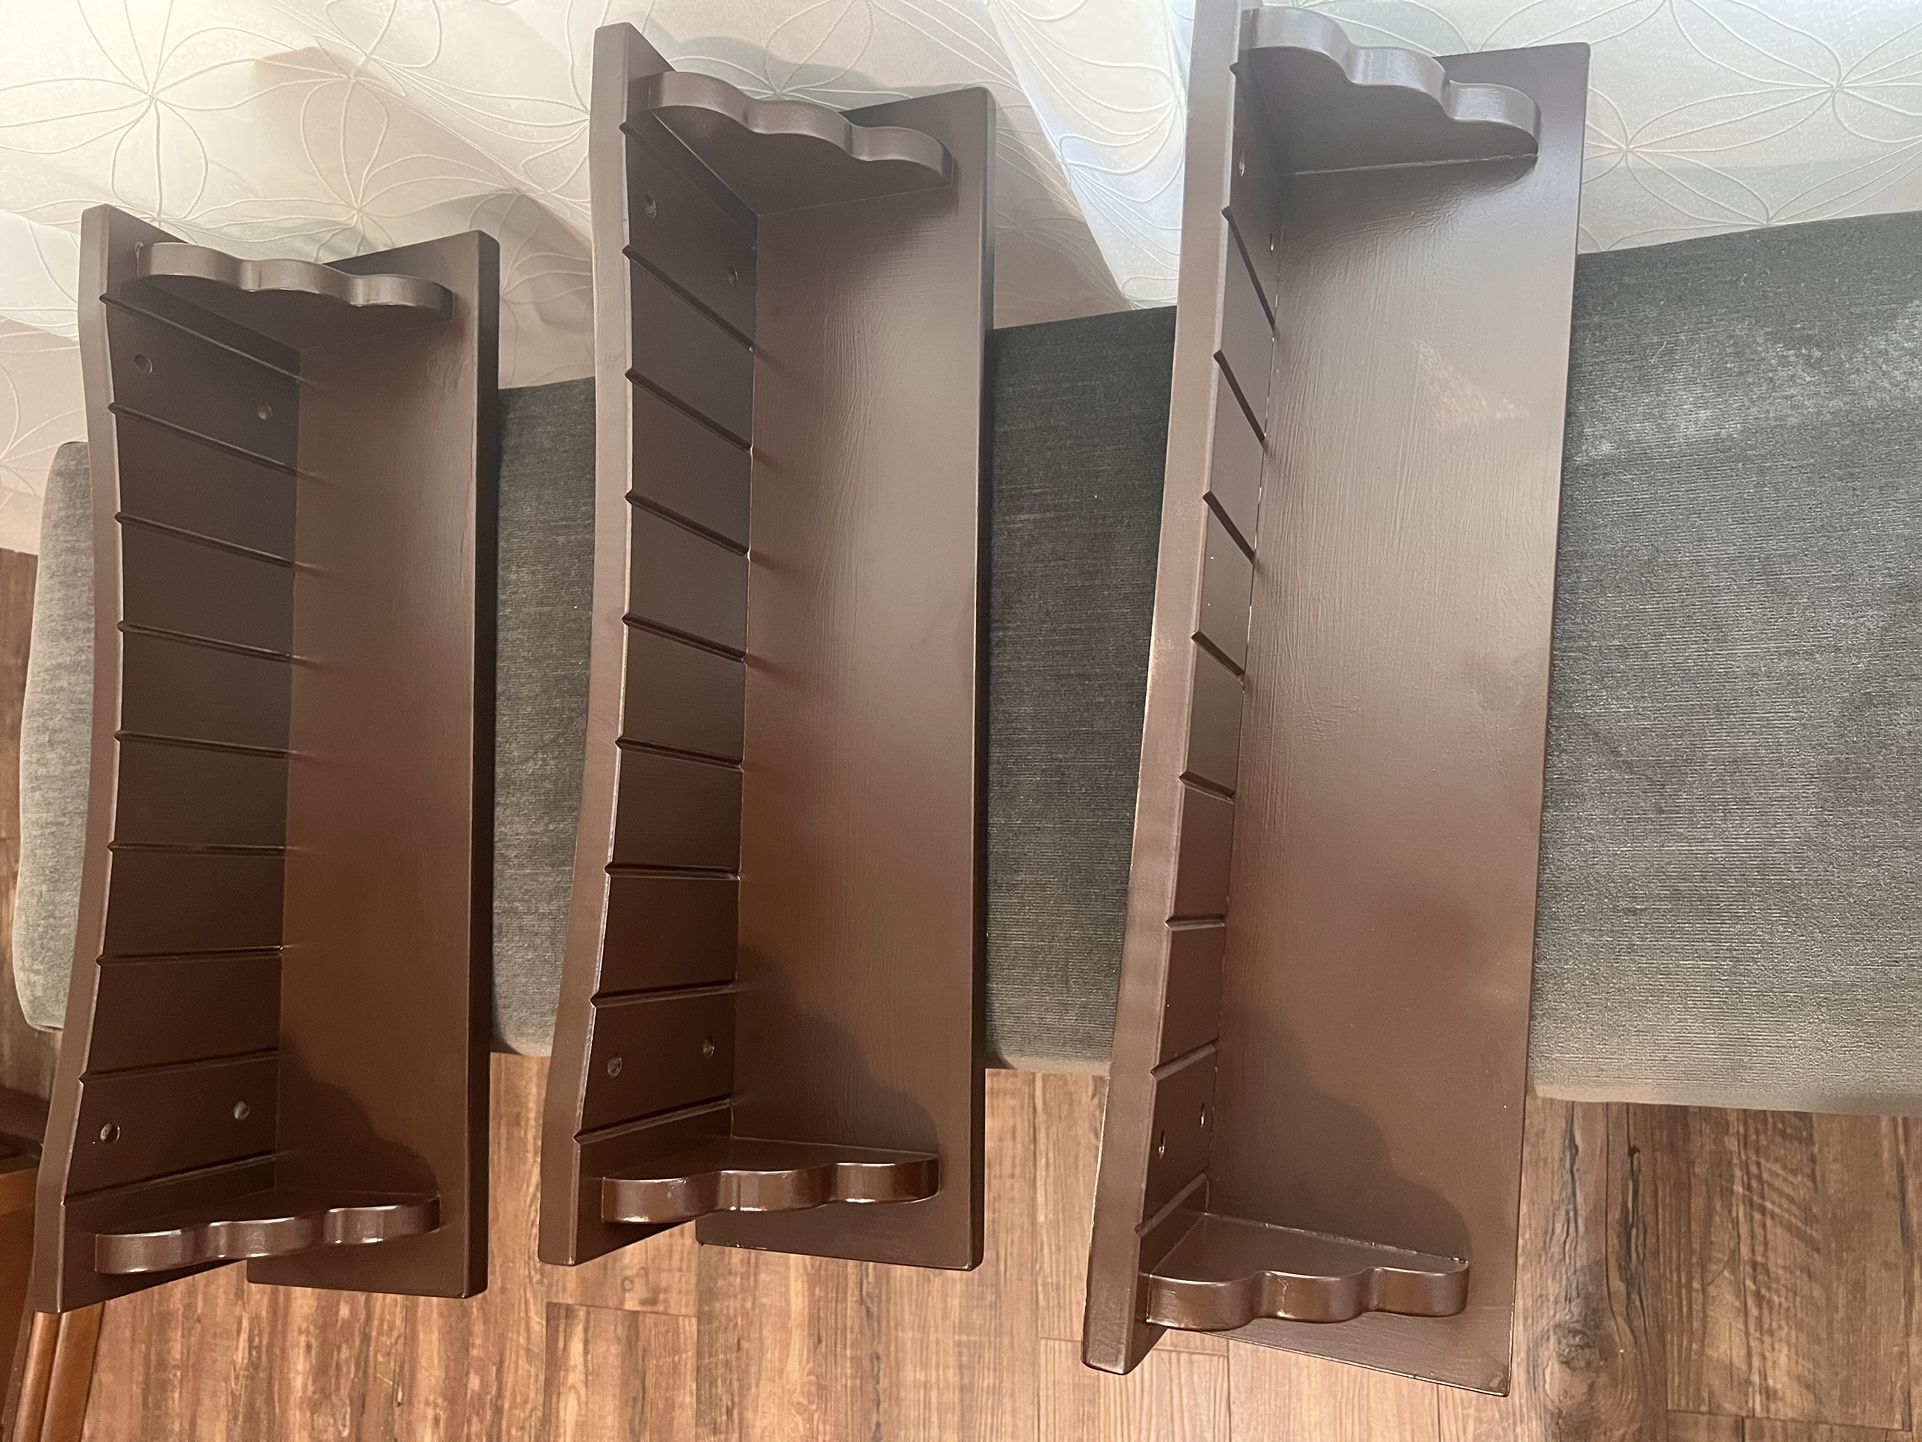 3 wall shelves wood painted expresso/ dark brown